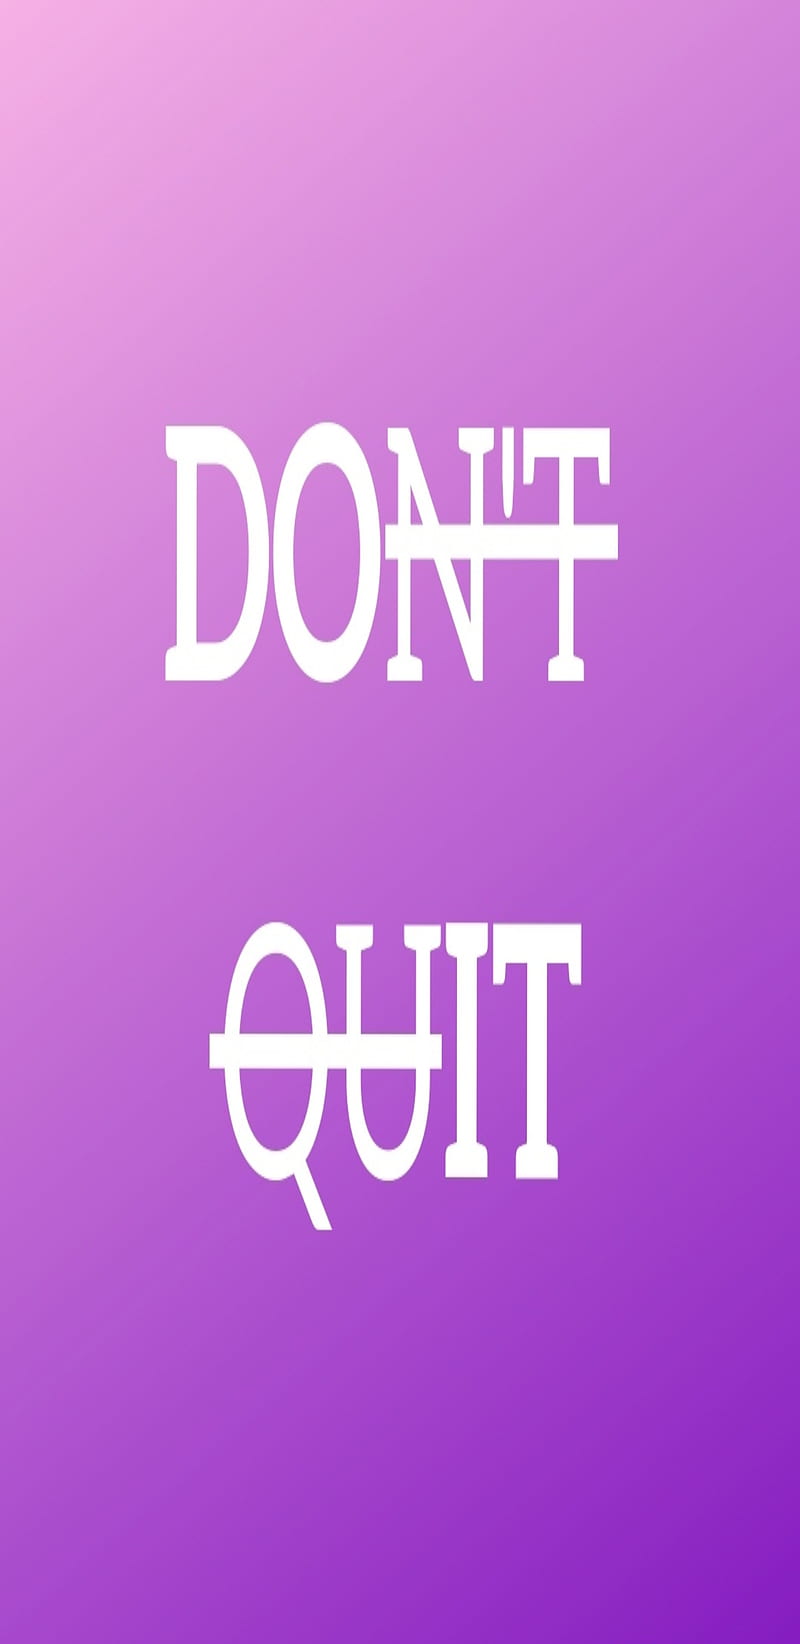 Dont Quit Images  Free Photos PNG Stickers Wallpapers  Backgrounds   rawpixel